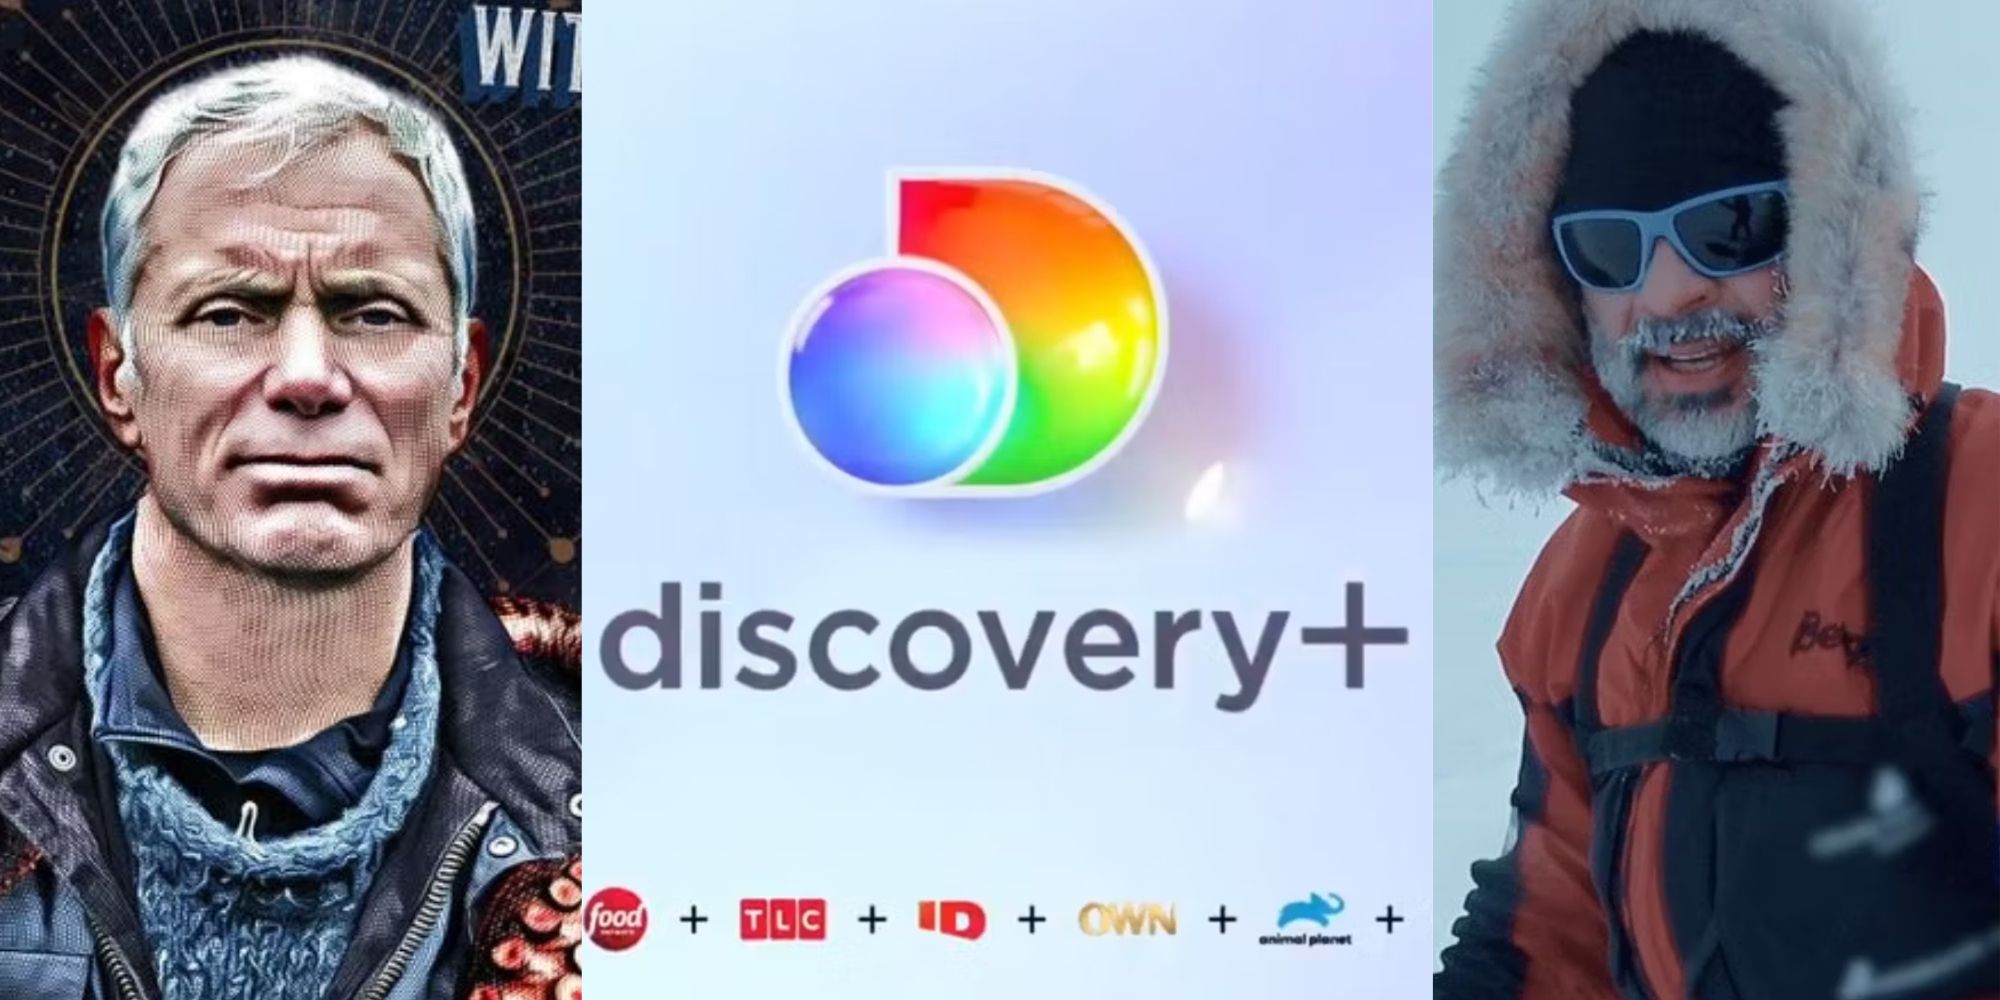 A split image of the Discovery+ logo and stills from two travel shows.